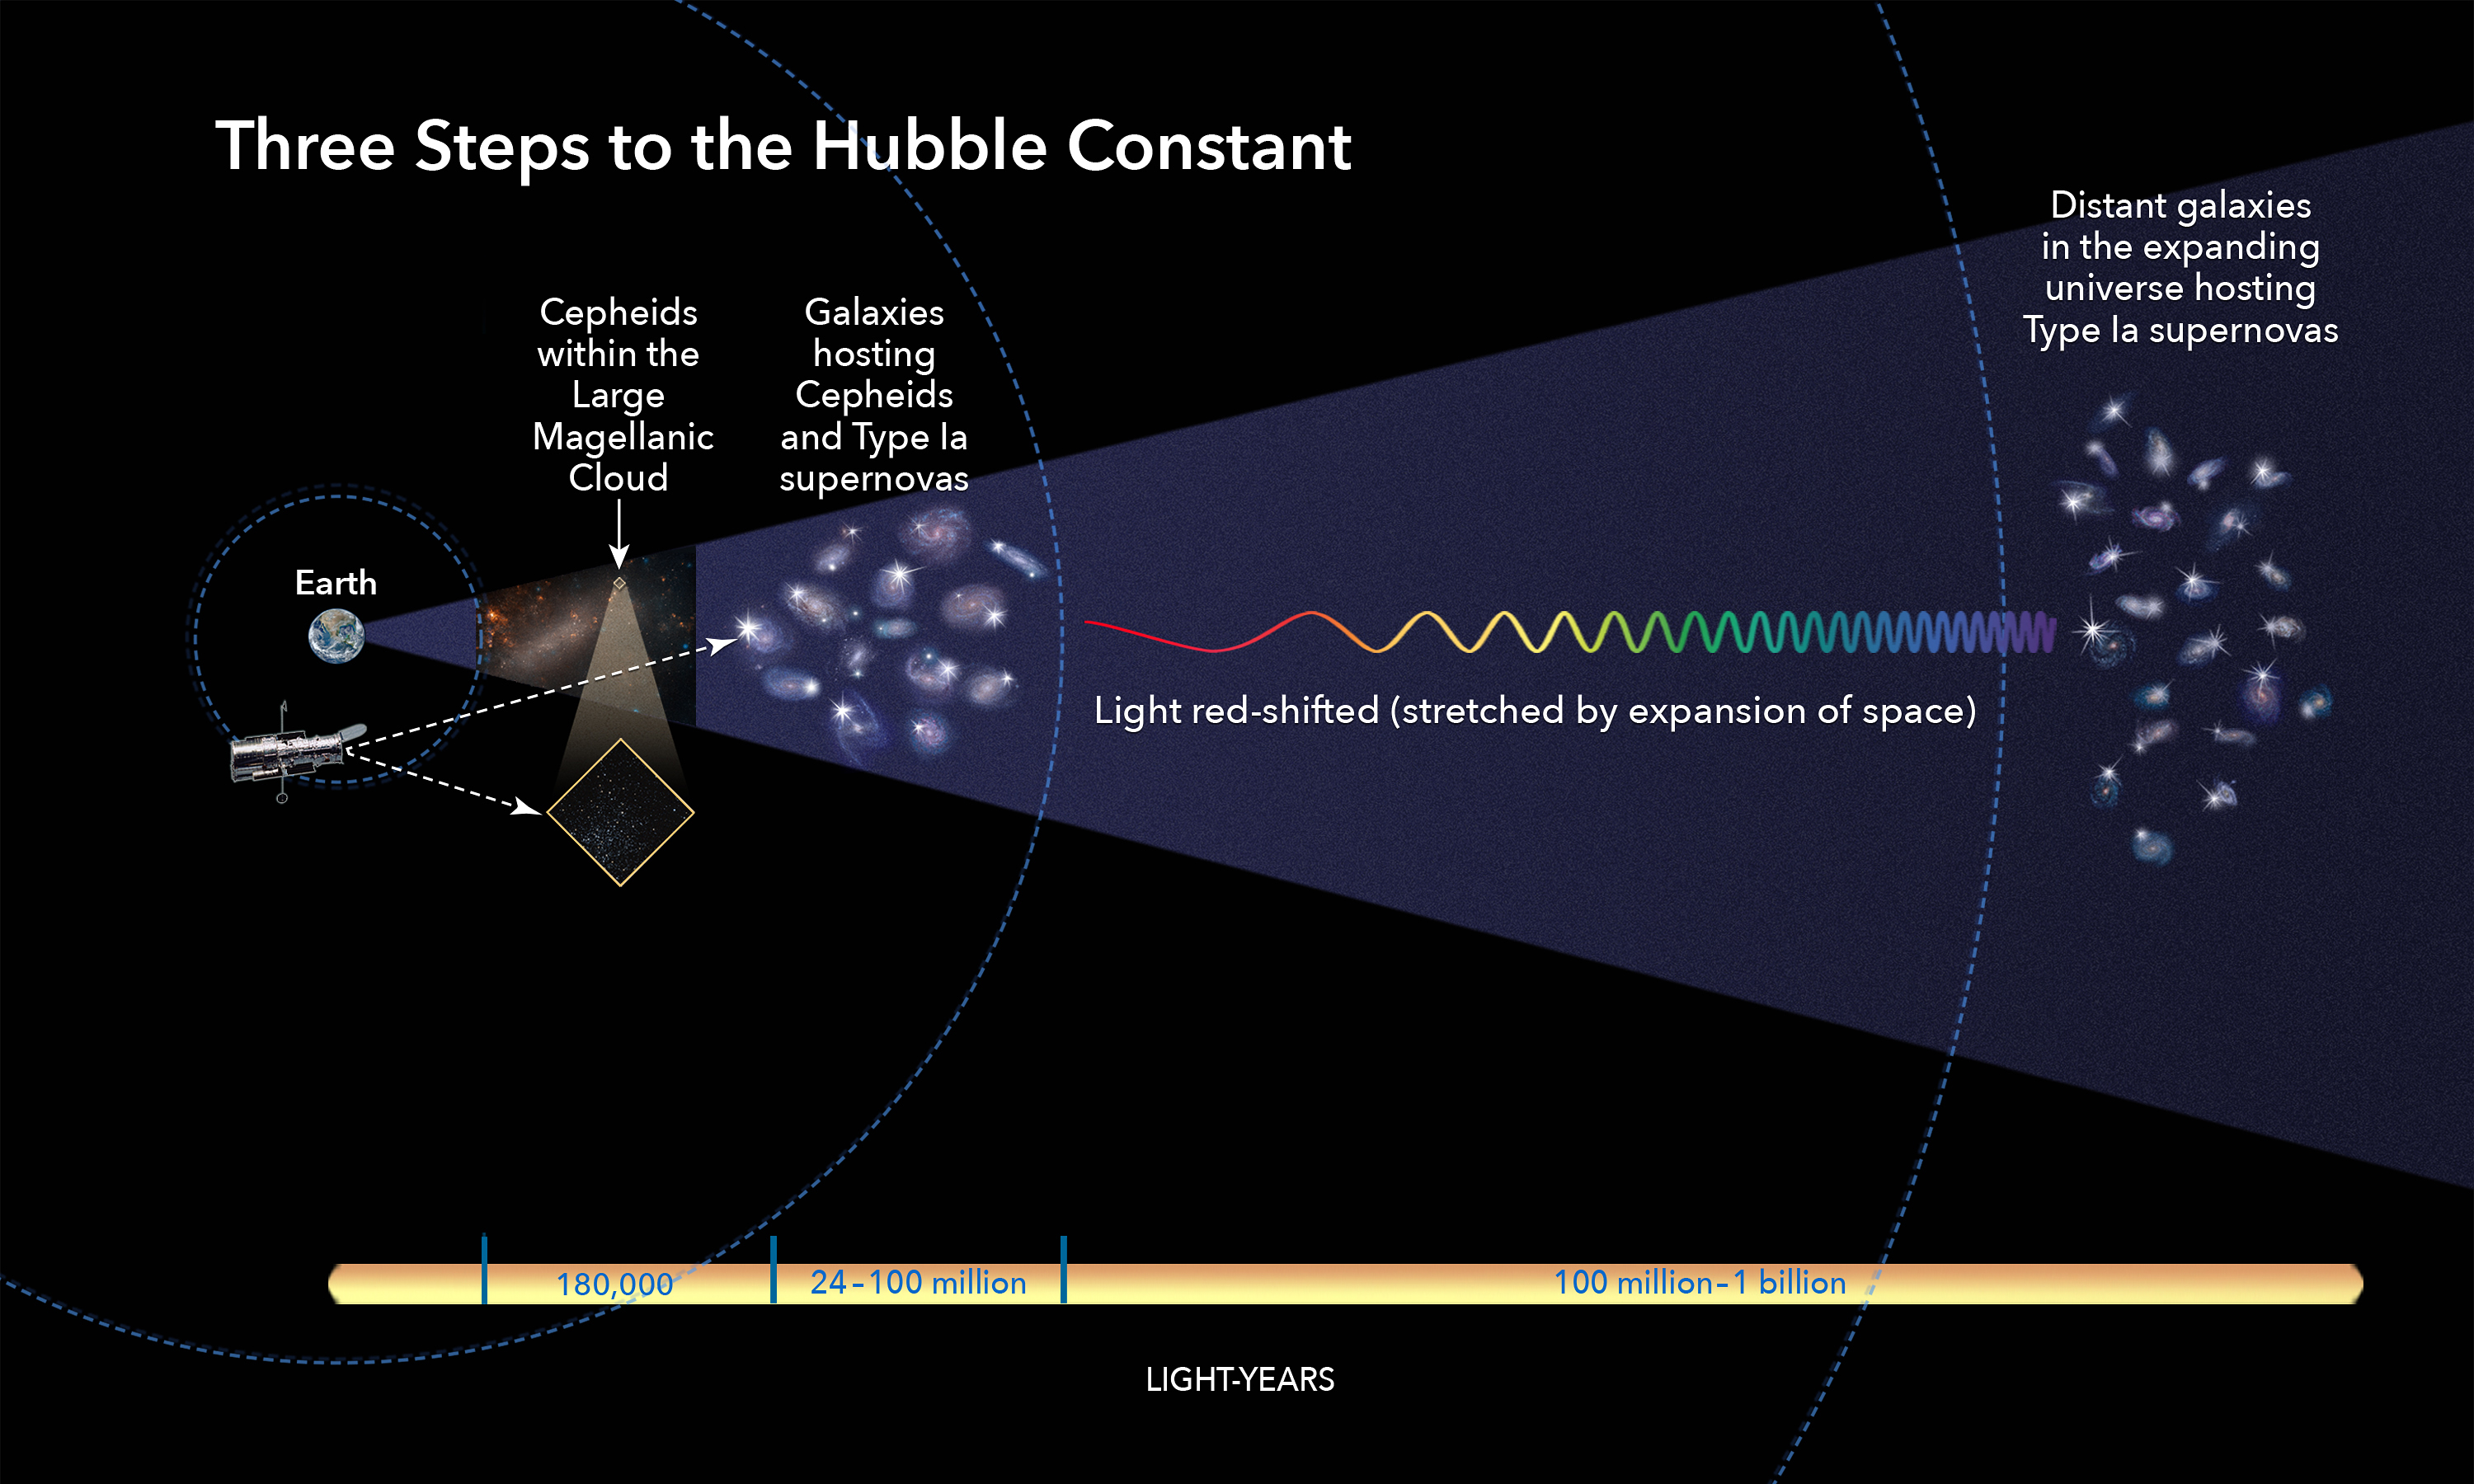 Illustration with black background. On the left side of the image is Earth and the Hubble Space Telescope. Hubble is pointing toward the right. A cone of light purple light starts at Earth and stretches to the right side of the image. At intervals along the cone are objects astronomers use to calculate distances. The first are Cepheid variable stars in the Large Magellanic Cloud (a satellite galaxy of our own Milky Way). Next are Cepheids and Type 1a Supernovas in galaxies. The cone next holds an illustration of how light is red-shifted due to the expansion of space. Finally, distant galaxies that host Type 1a supernovas mark the right side of the extended cone. Along the bottom of the illustration is a gauge in yellow that marks the distance of each object in light years: from Earth extending out to 1 billion light years.